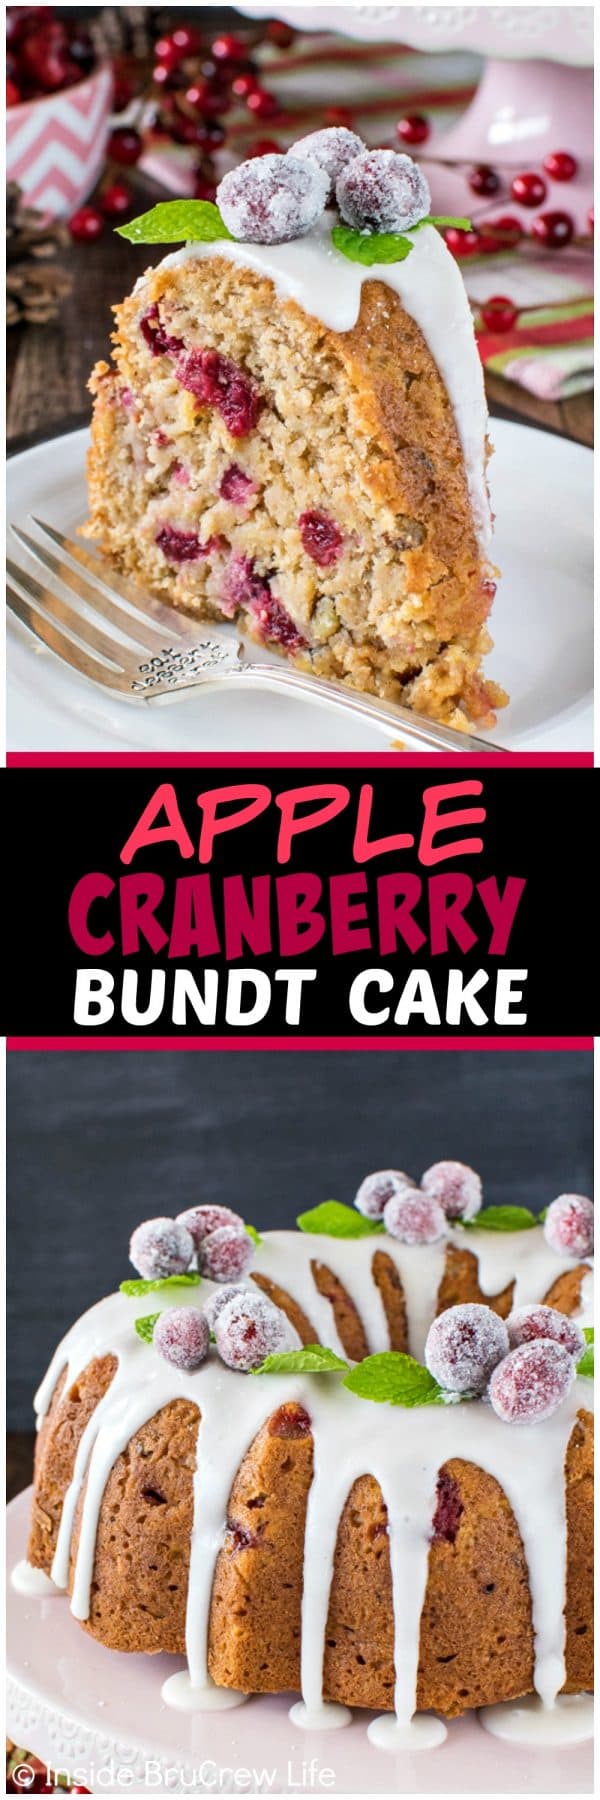 Apple Cranberry Bundt Cake - a sweet glaze and fresh apples & berries make this a fun and festive cake. Great recipe for holiday parties!